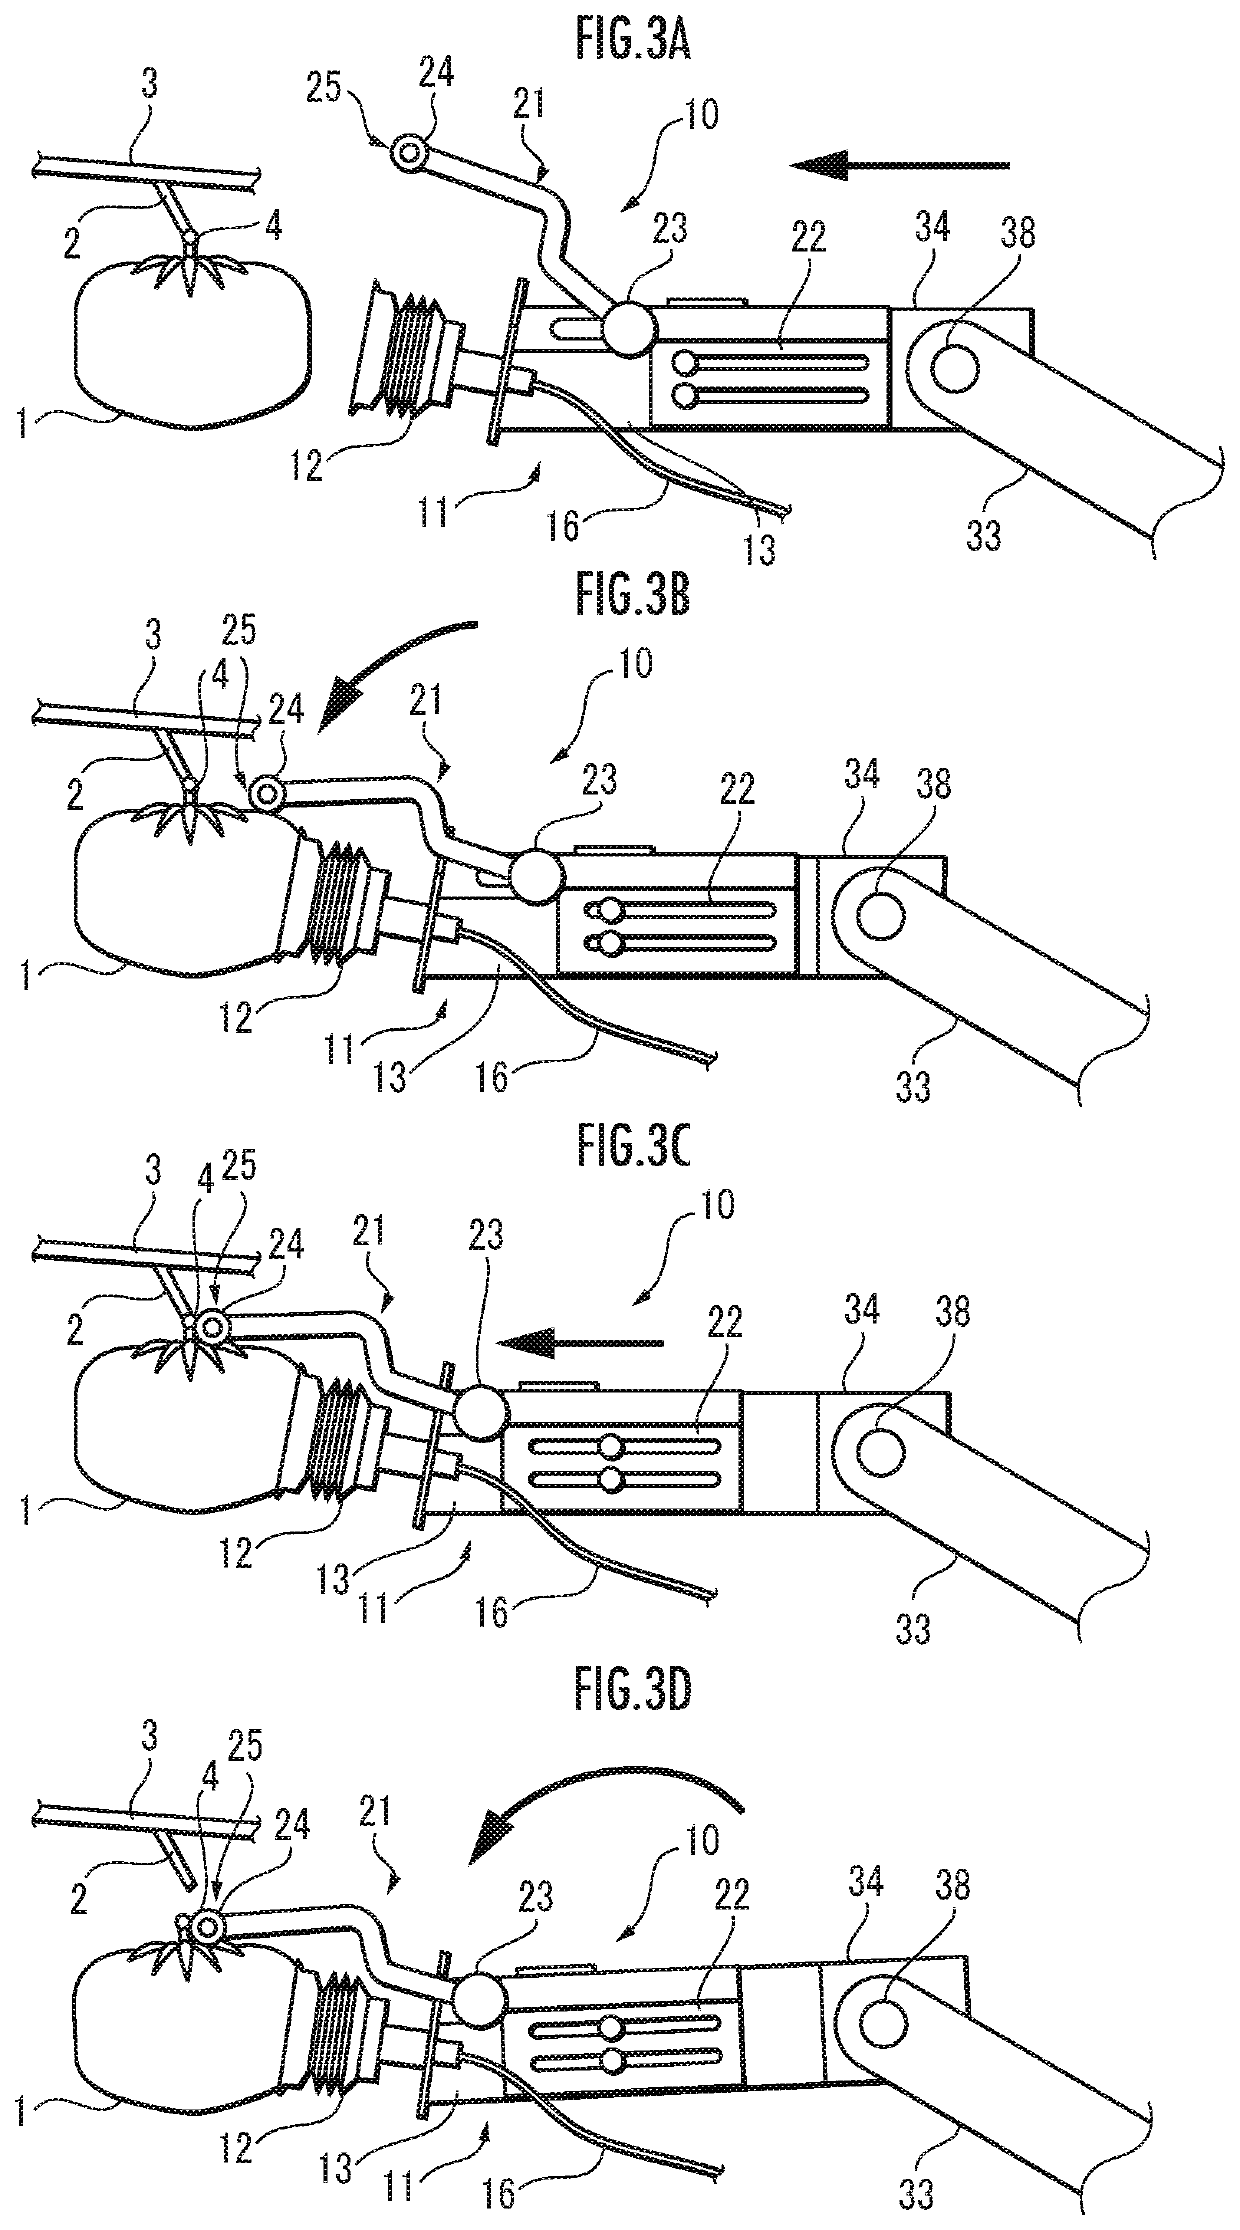 Fruit and vegetable harvesting device